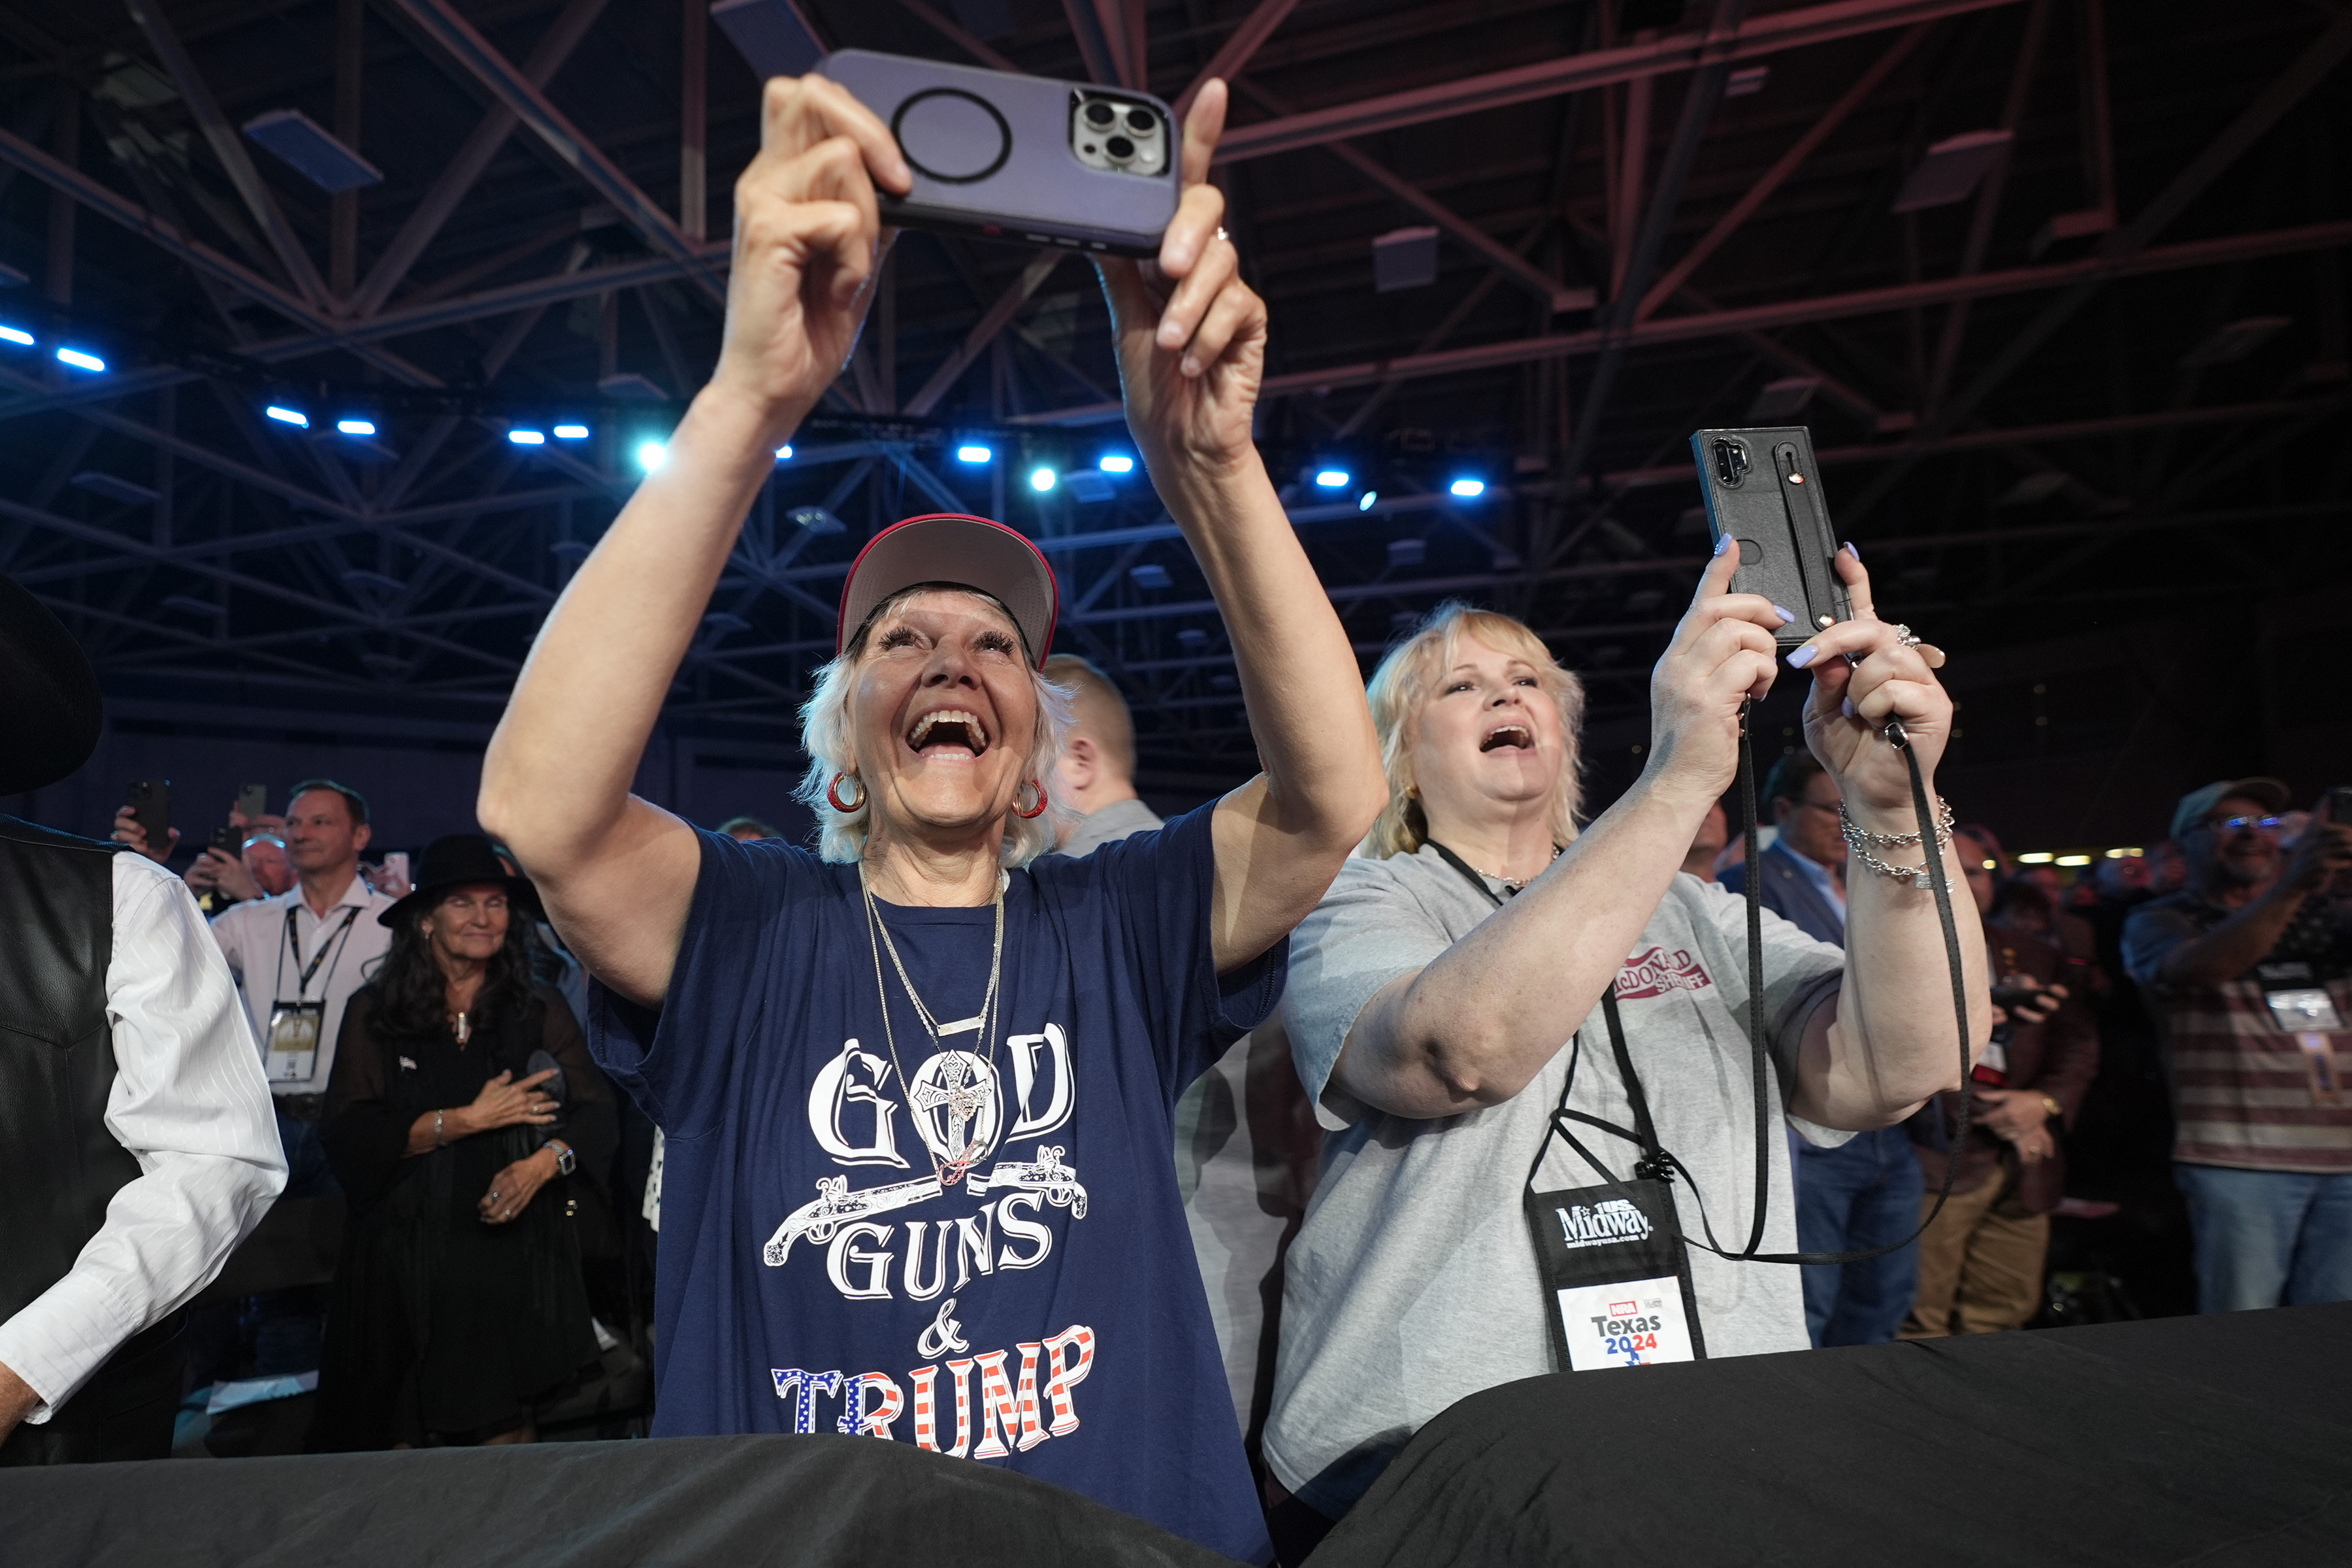 Supporters cheer for former president Donald Trump before he speaks at the National Rifle Association Convention on Saturday. Photo: AP